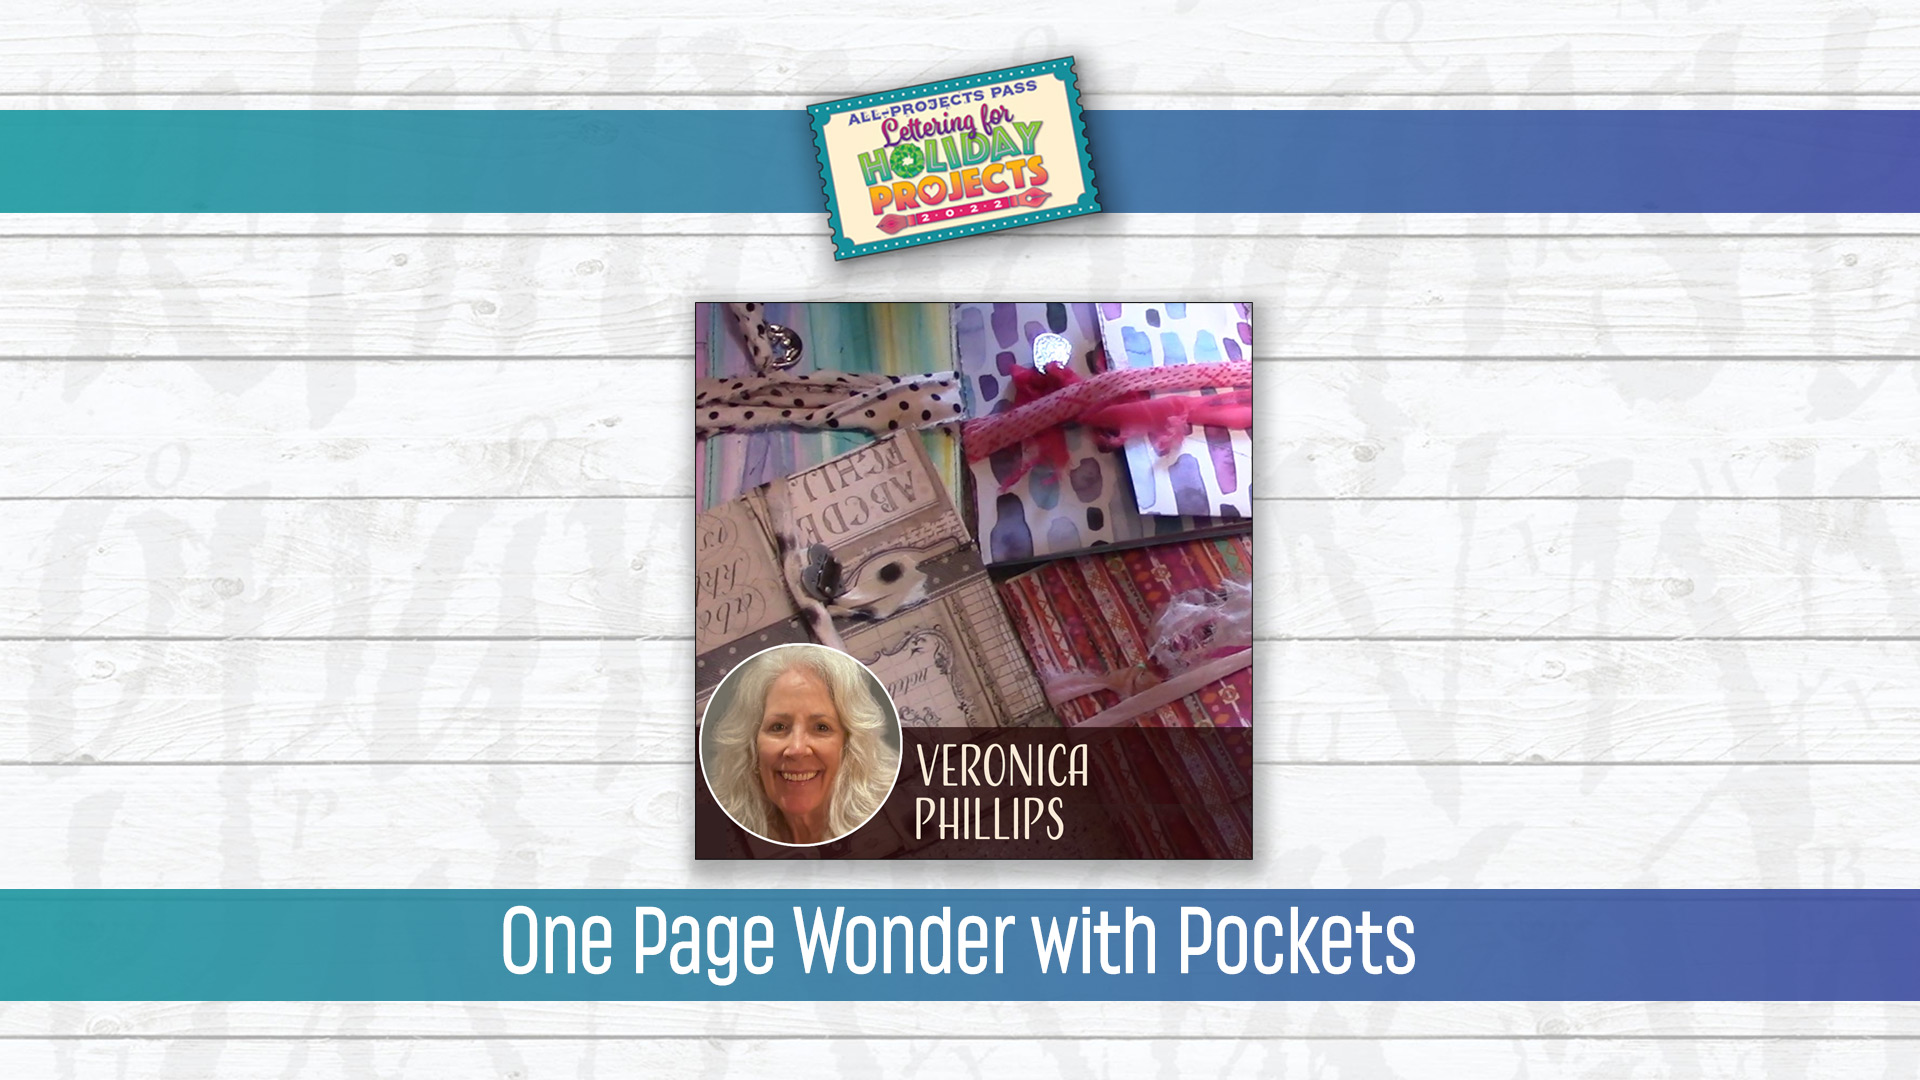 Veronica Phillips One Page Wonder with Pockets